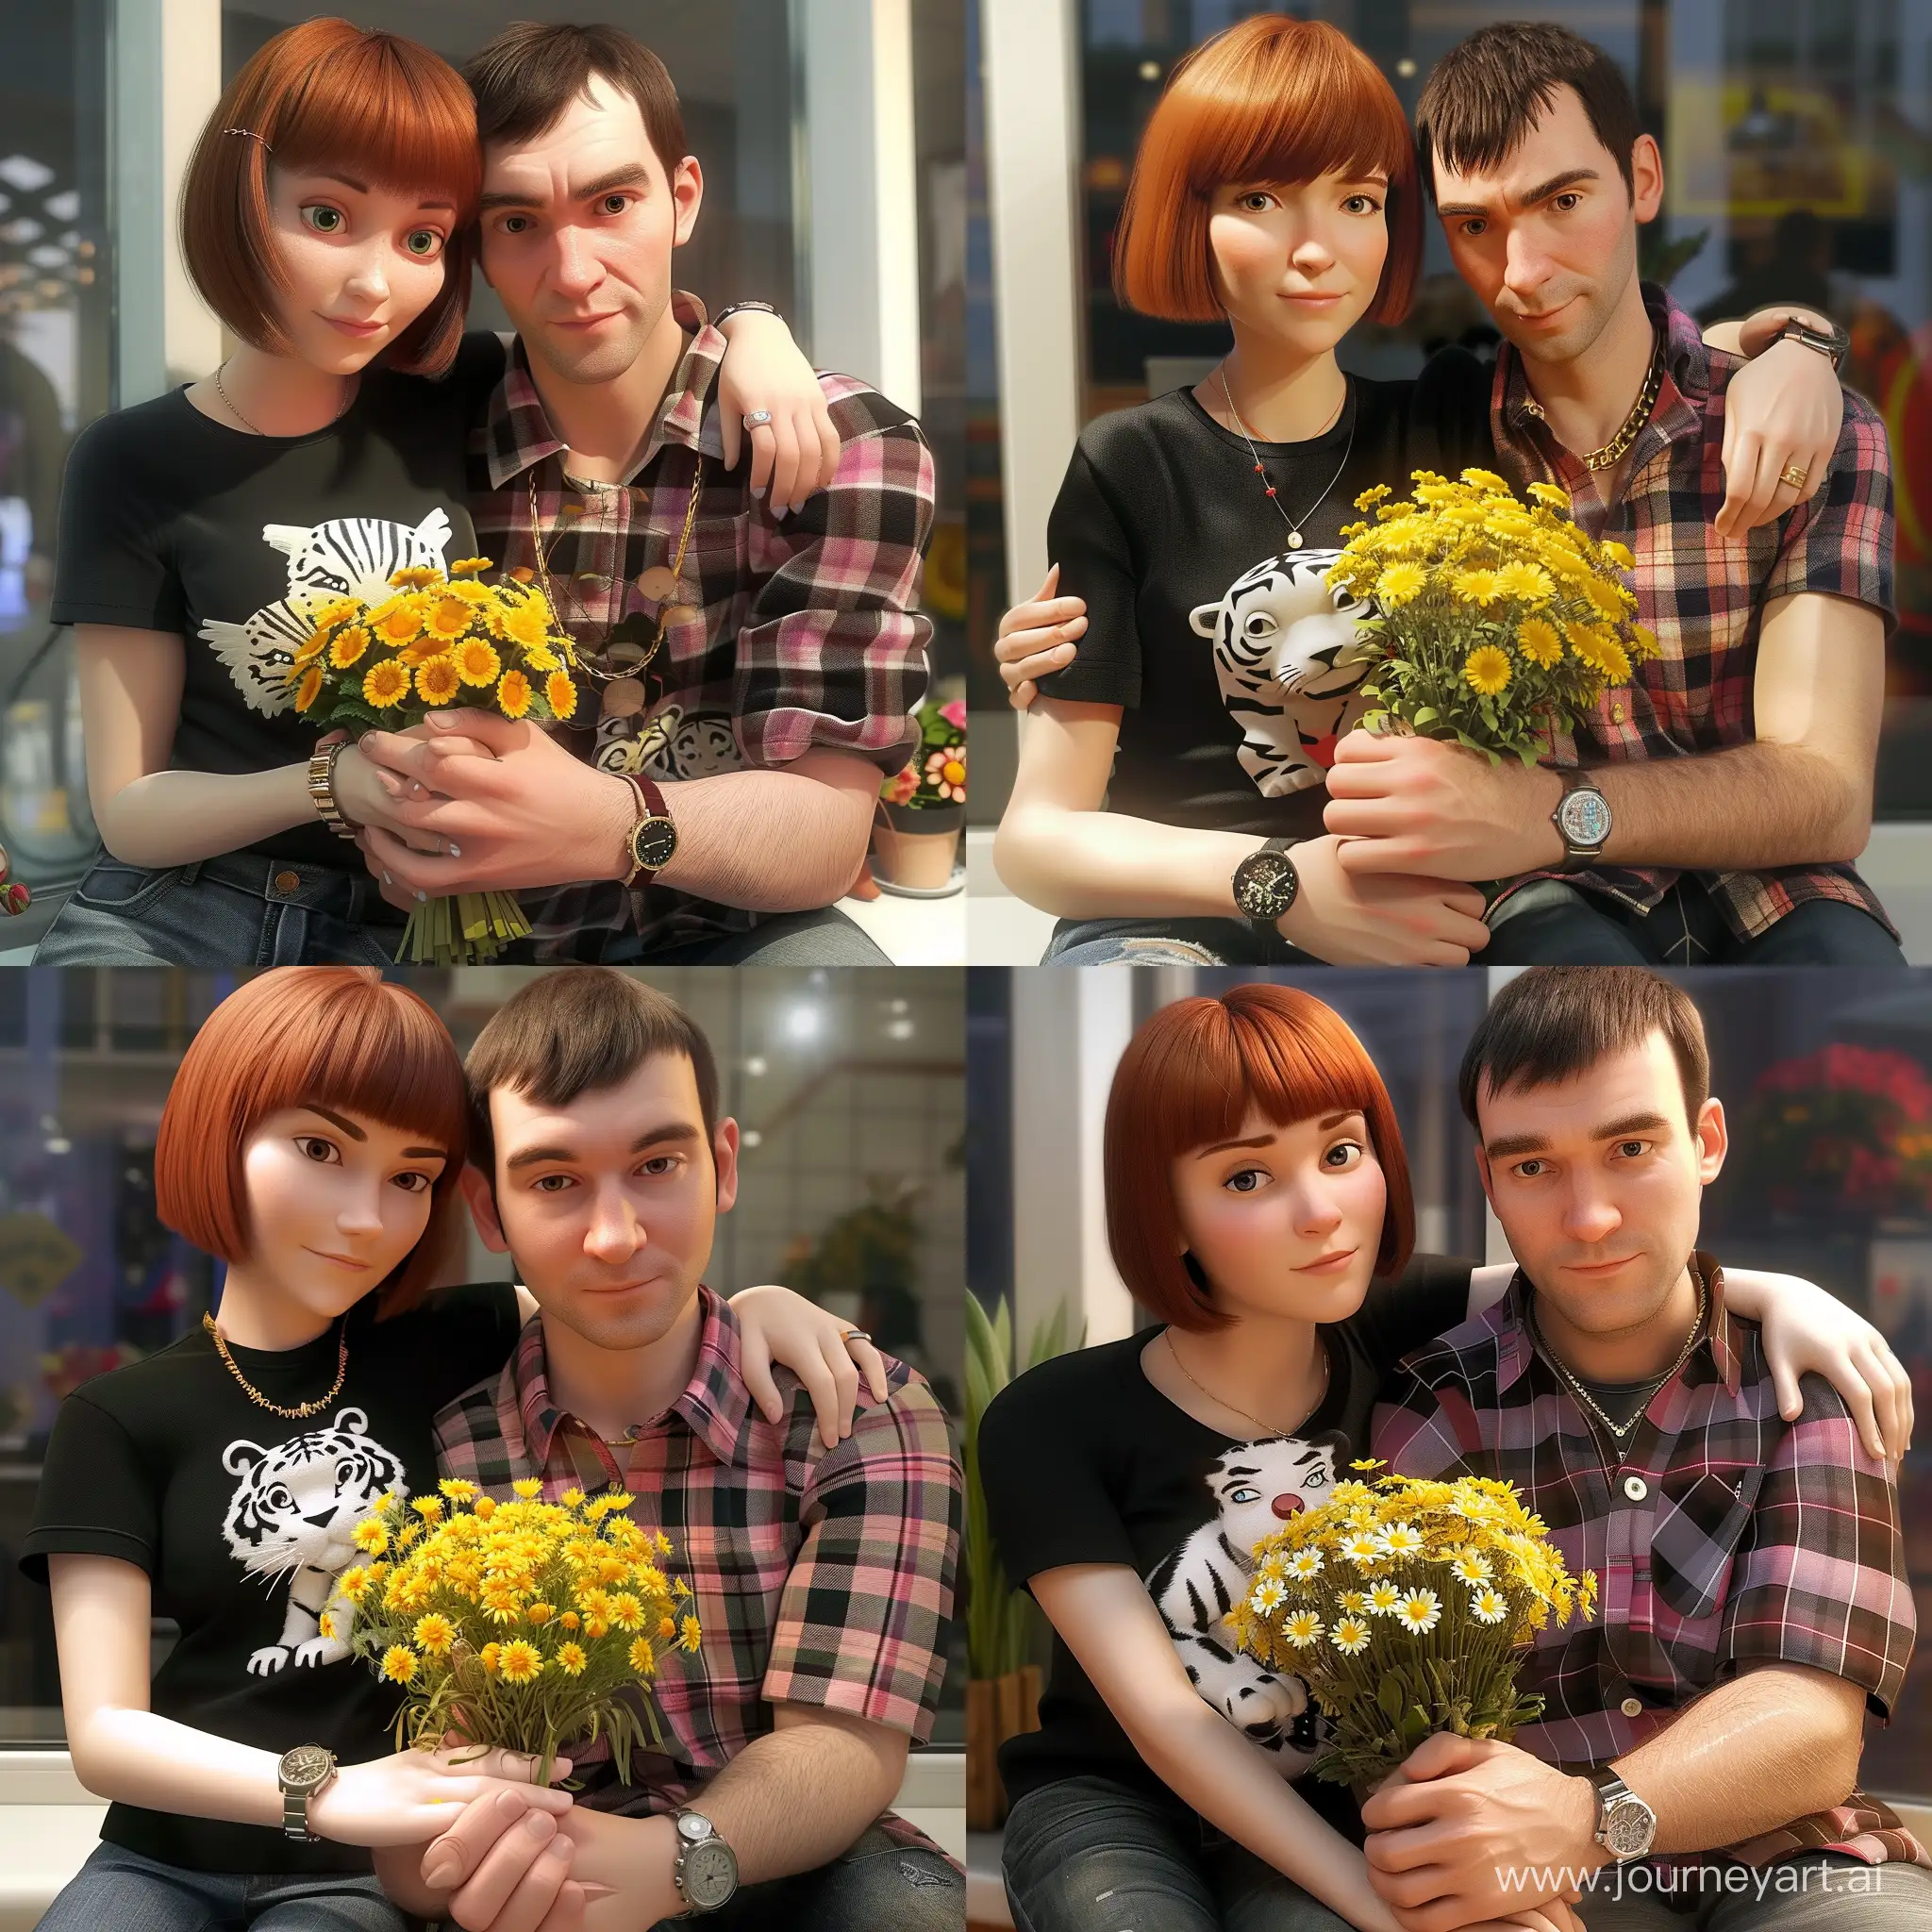 Romantic-Couple-in-PixarStyle-Cartoon-RedHaired-Girl-with-Daisies-and-Guy-with-Plaid-Shirt